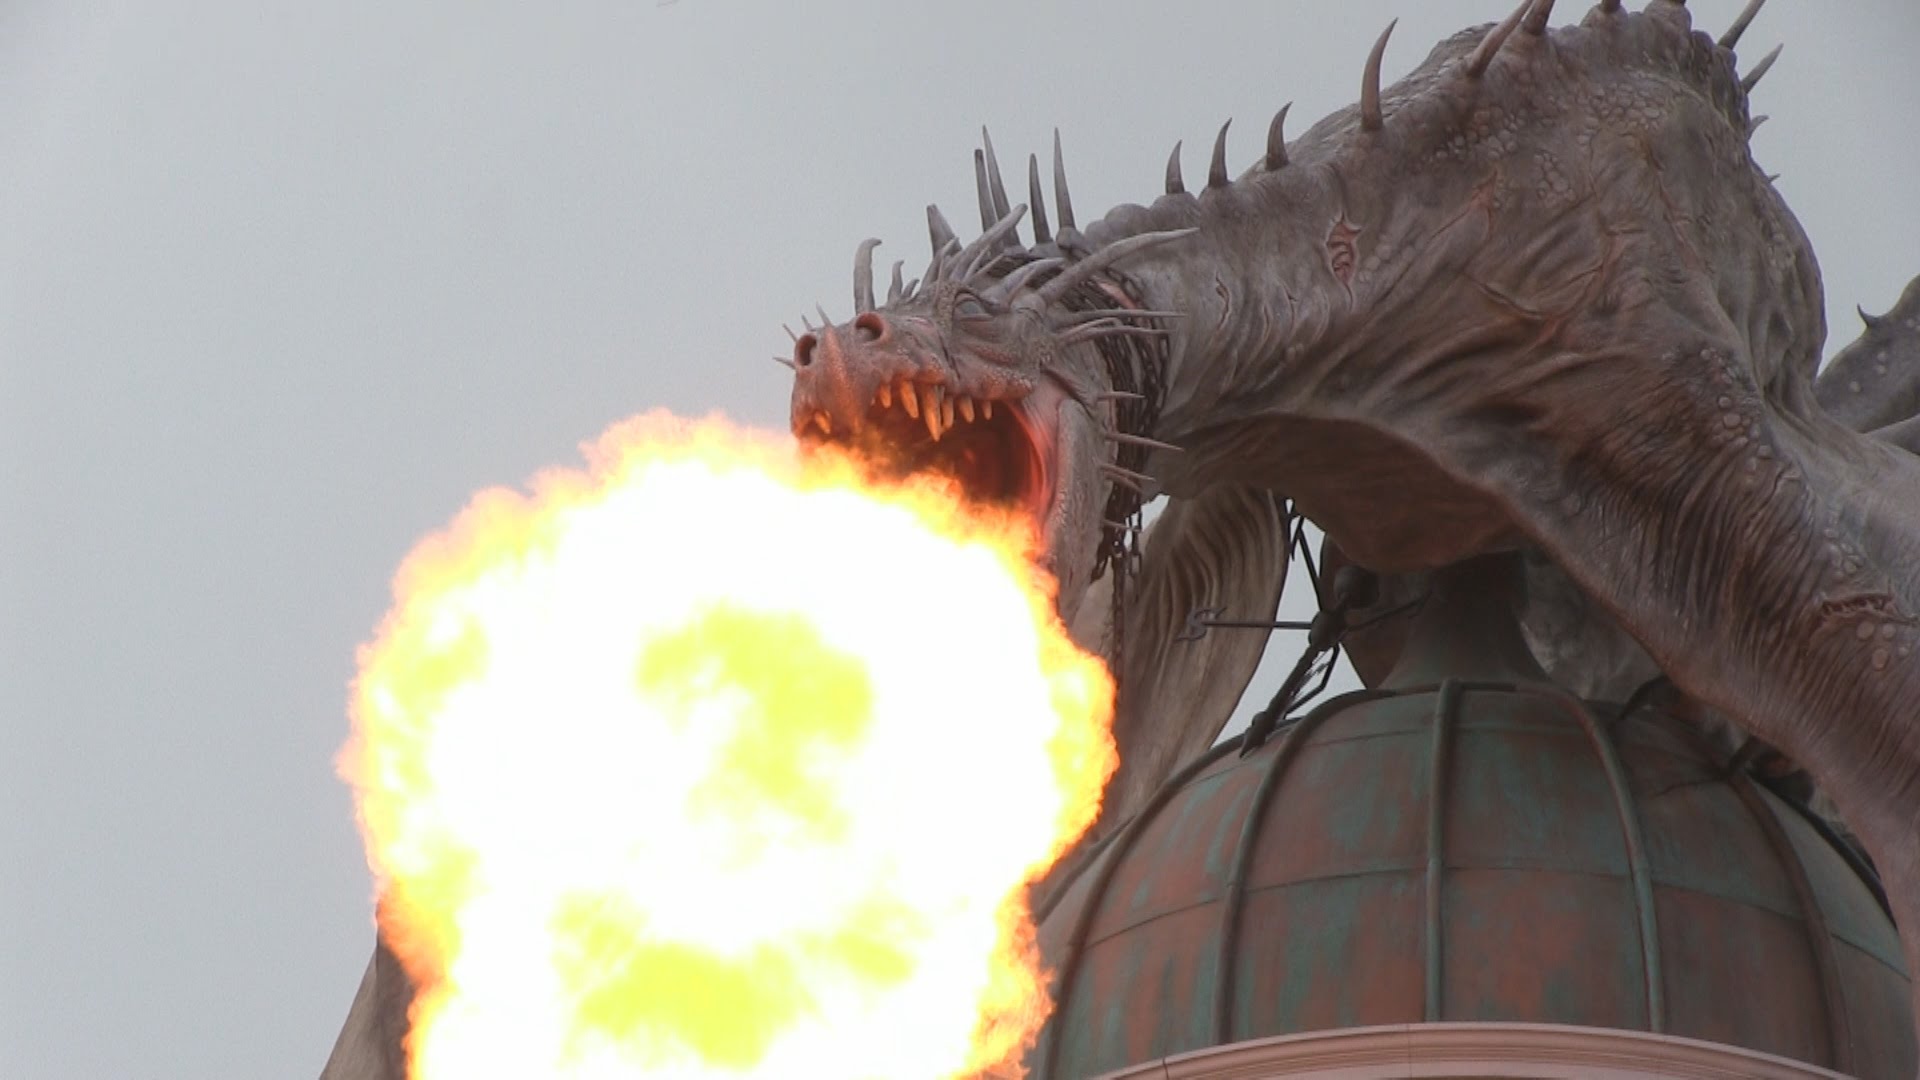 Clip Arts Related To : realistic fire breathing dragon. 